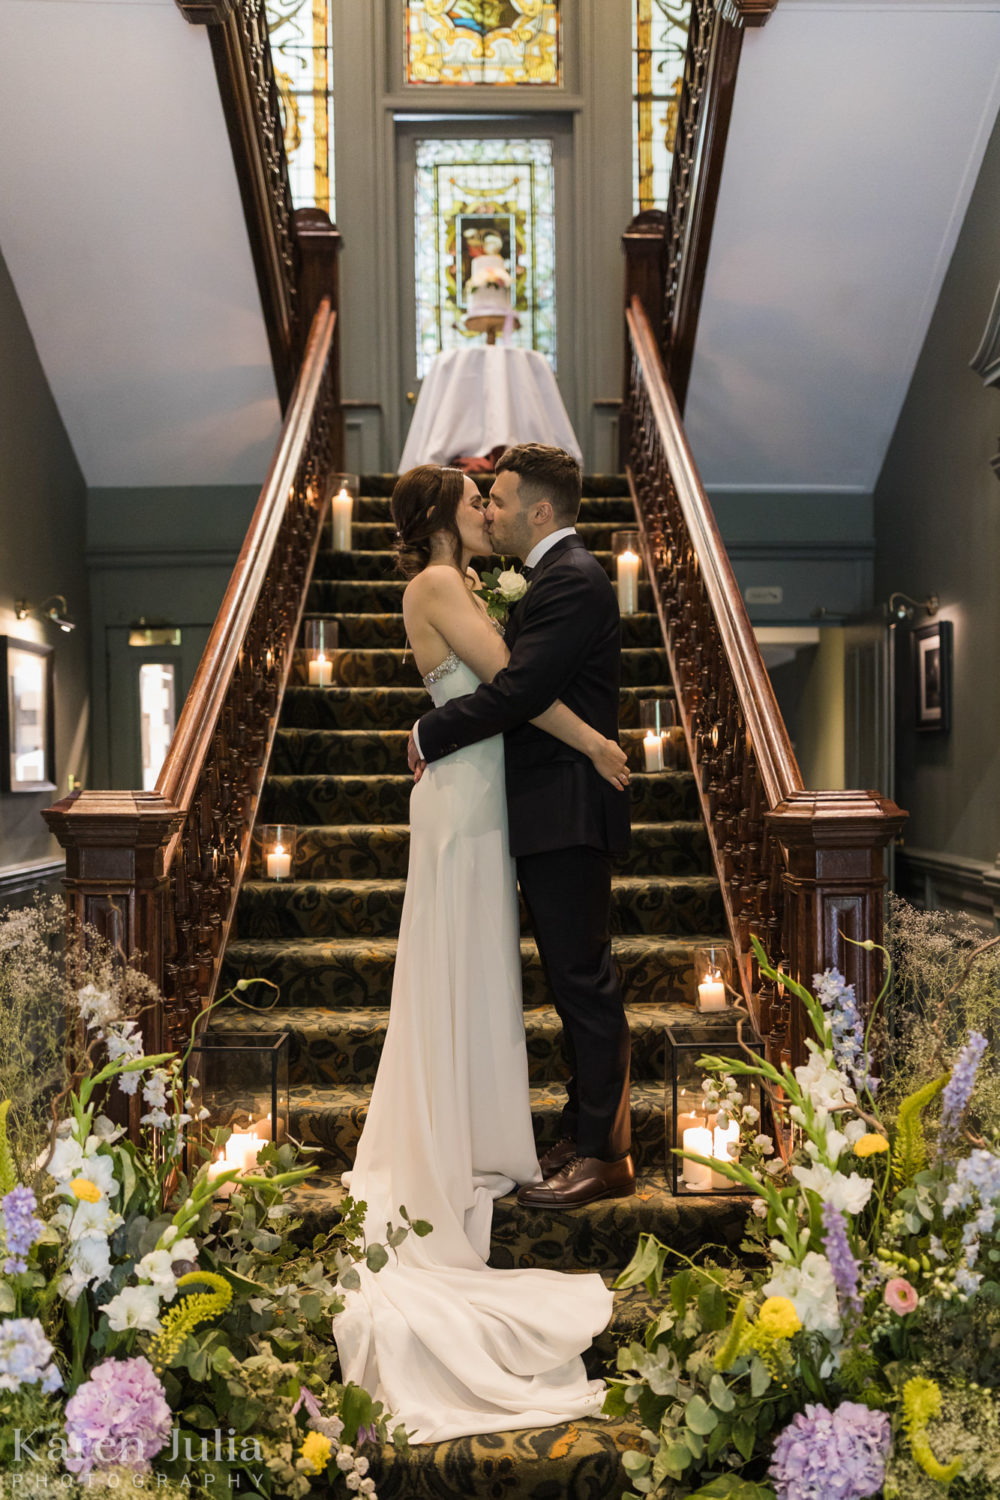 bride and groom embrace on the stairs at One Devonshire Gardens, surrounded by florals